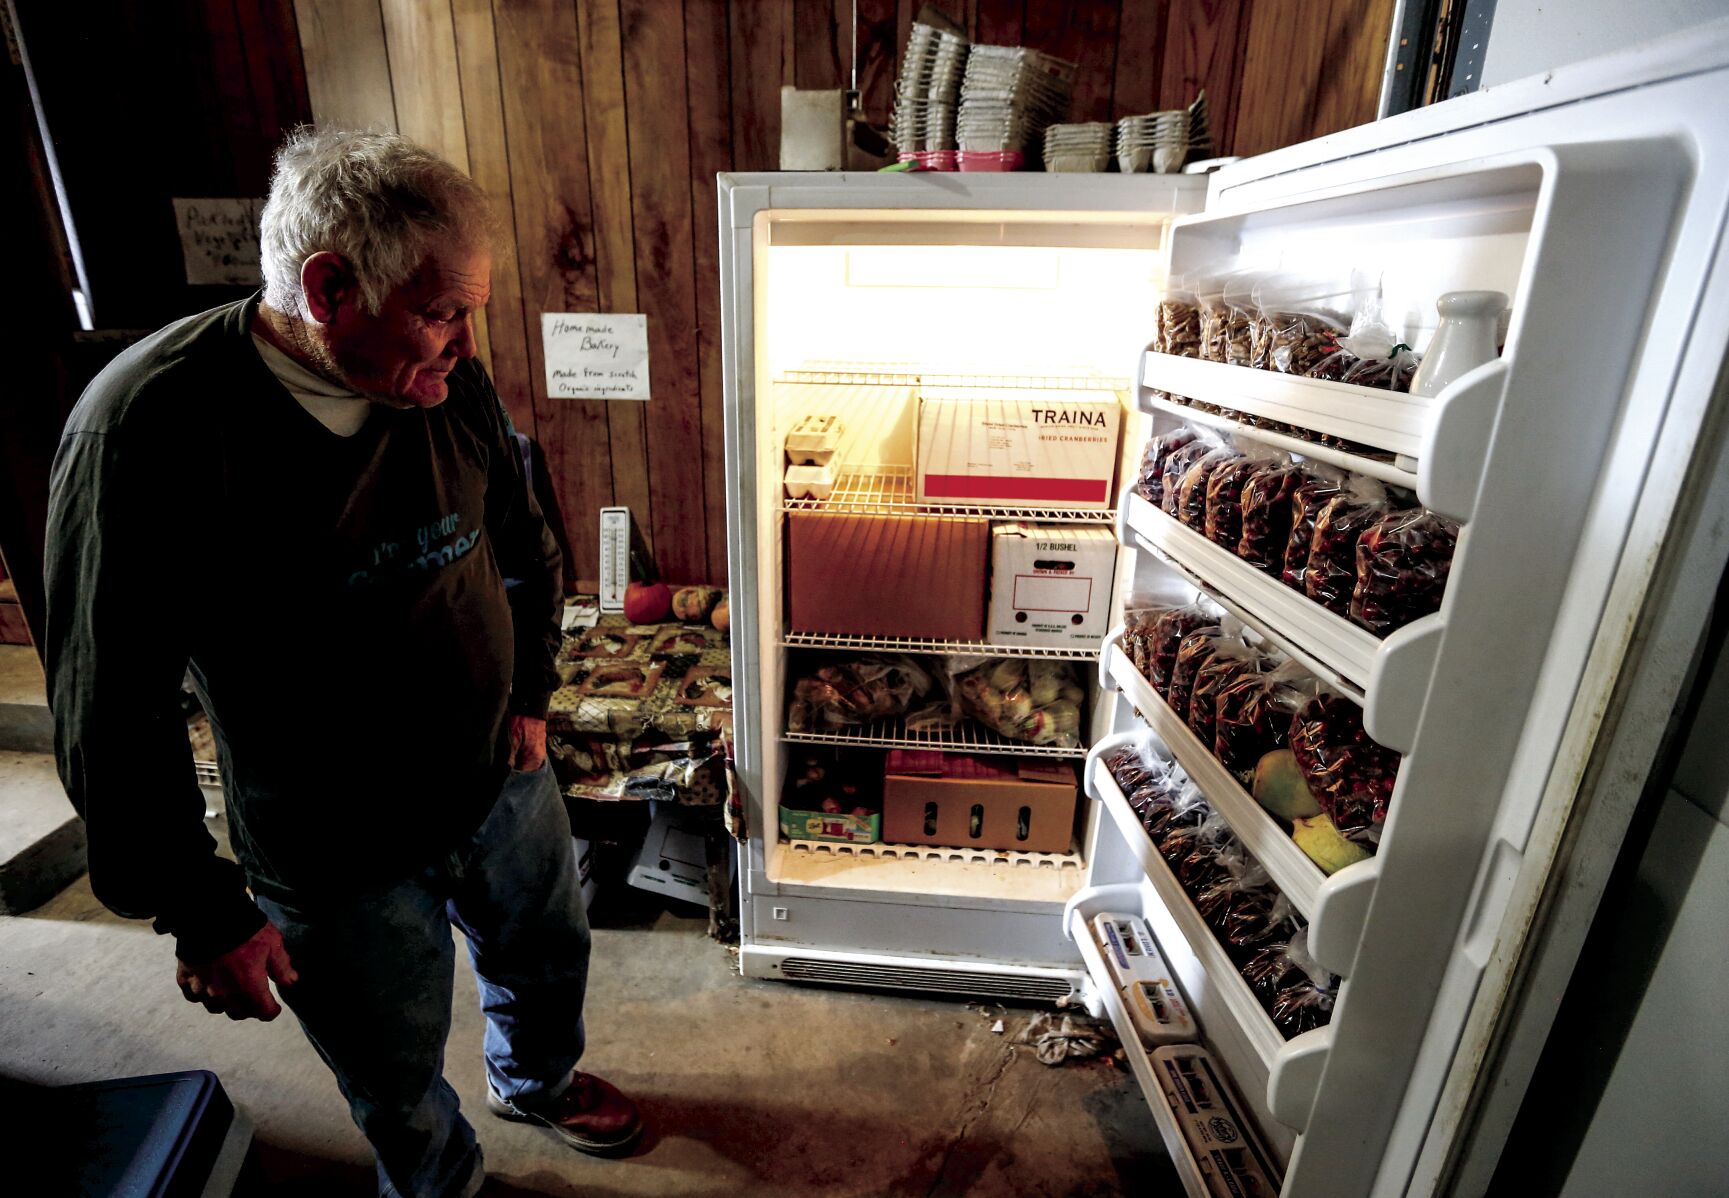 Walter Hammerand, owner of Hammerand Farm in Fennimore, Wis., takes inventory of his goods he sells at various farmers markets. He sells organic produce and products, and continues a longtime family tradition of selling at farmers markets.    PHOTO CREDIT: Dave Kettering
Telegraph Herald